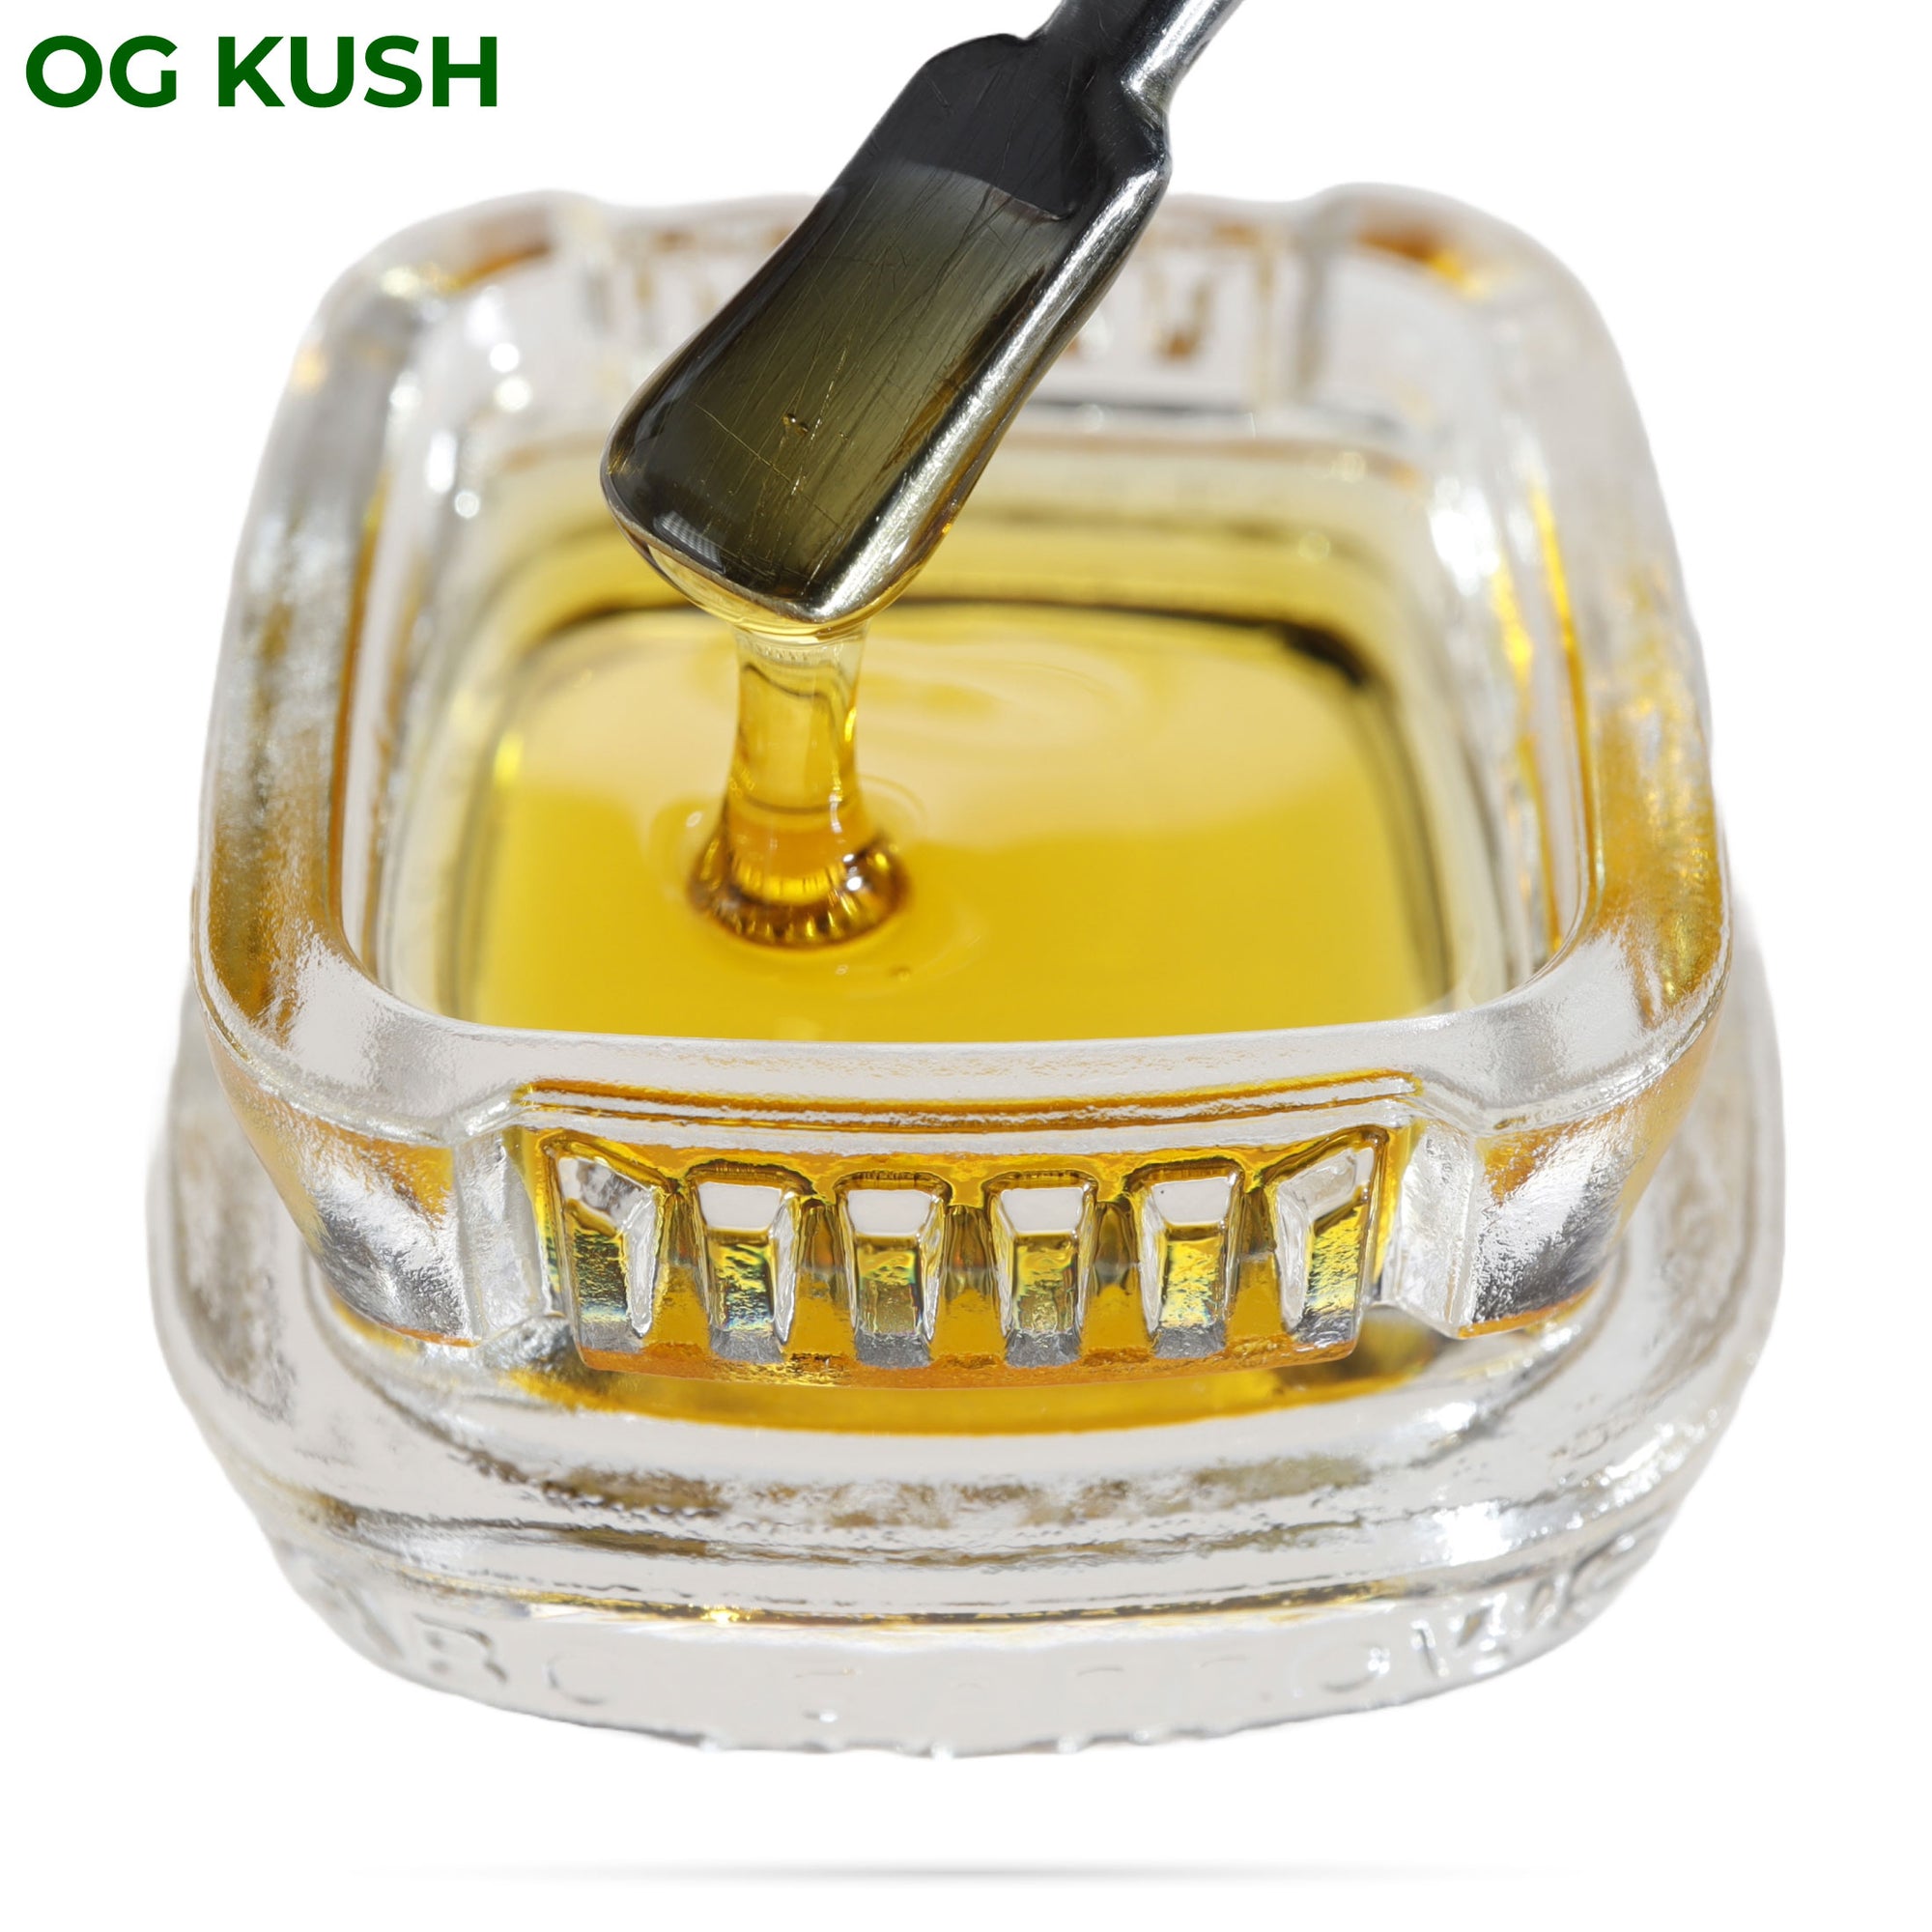 Image of OG Kush CBD Live Resin dripping from a dab tool into a calyx container.